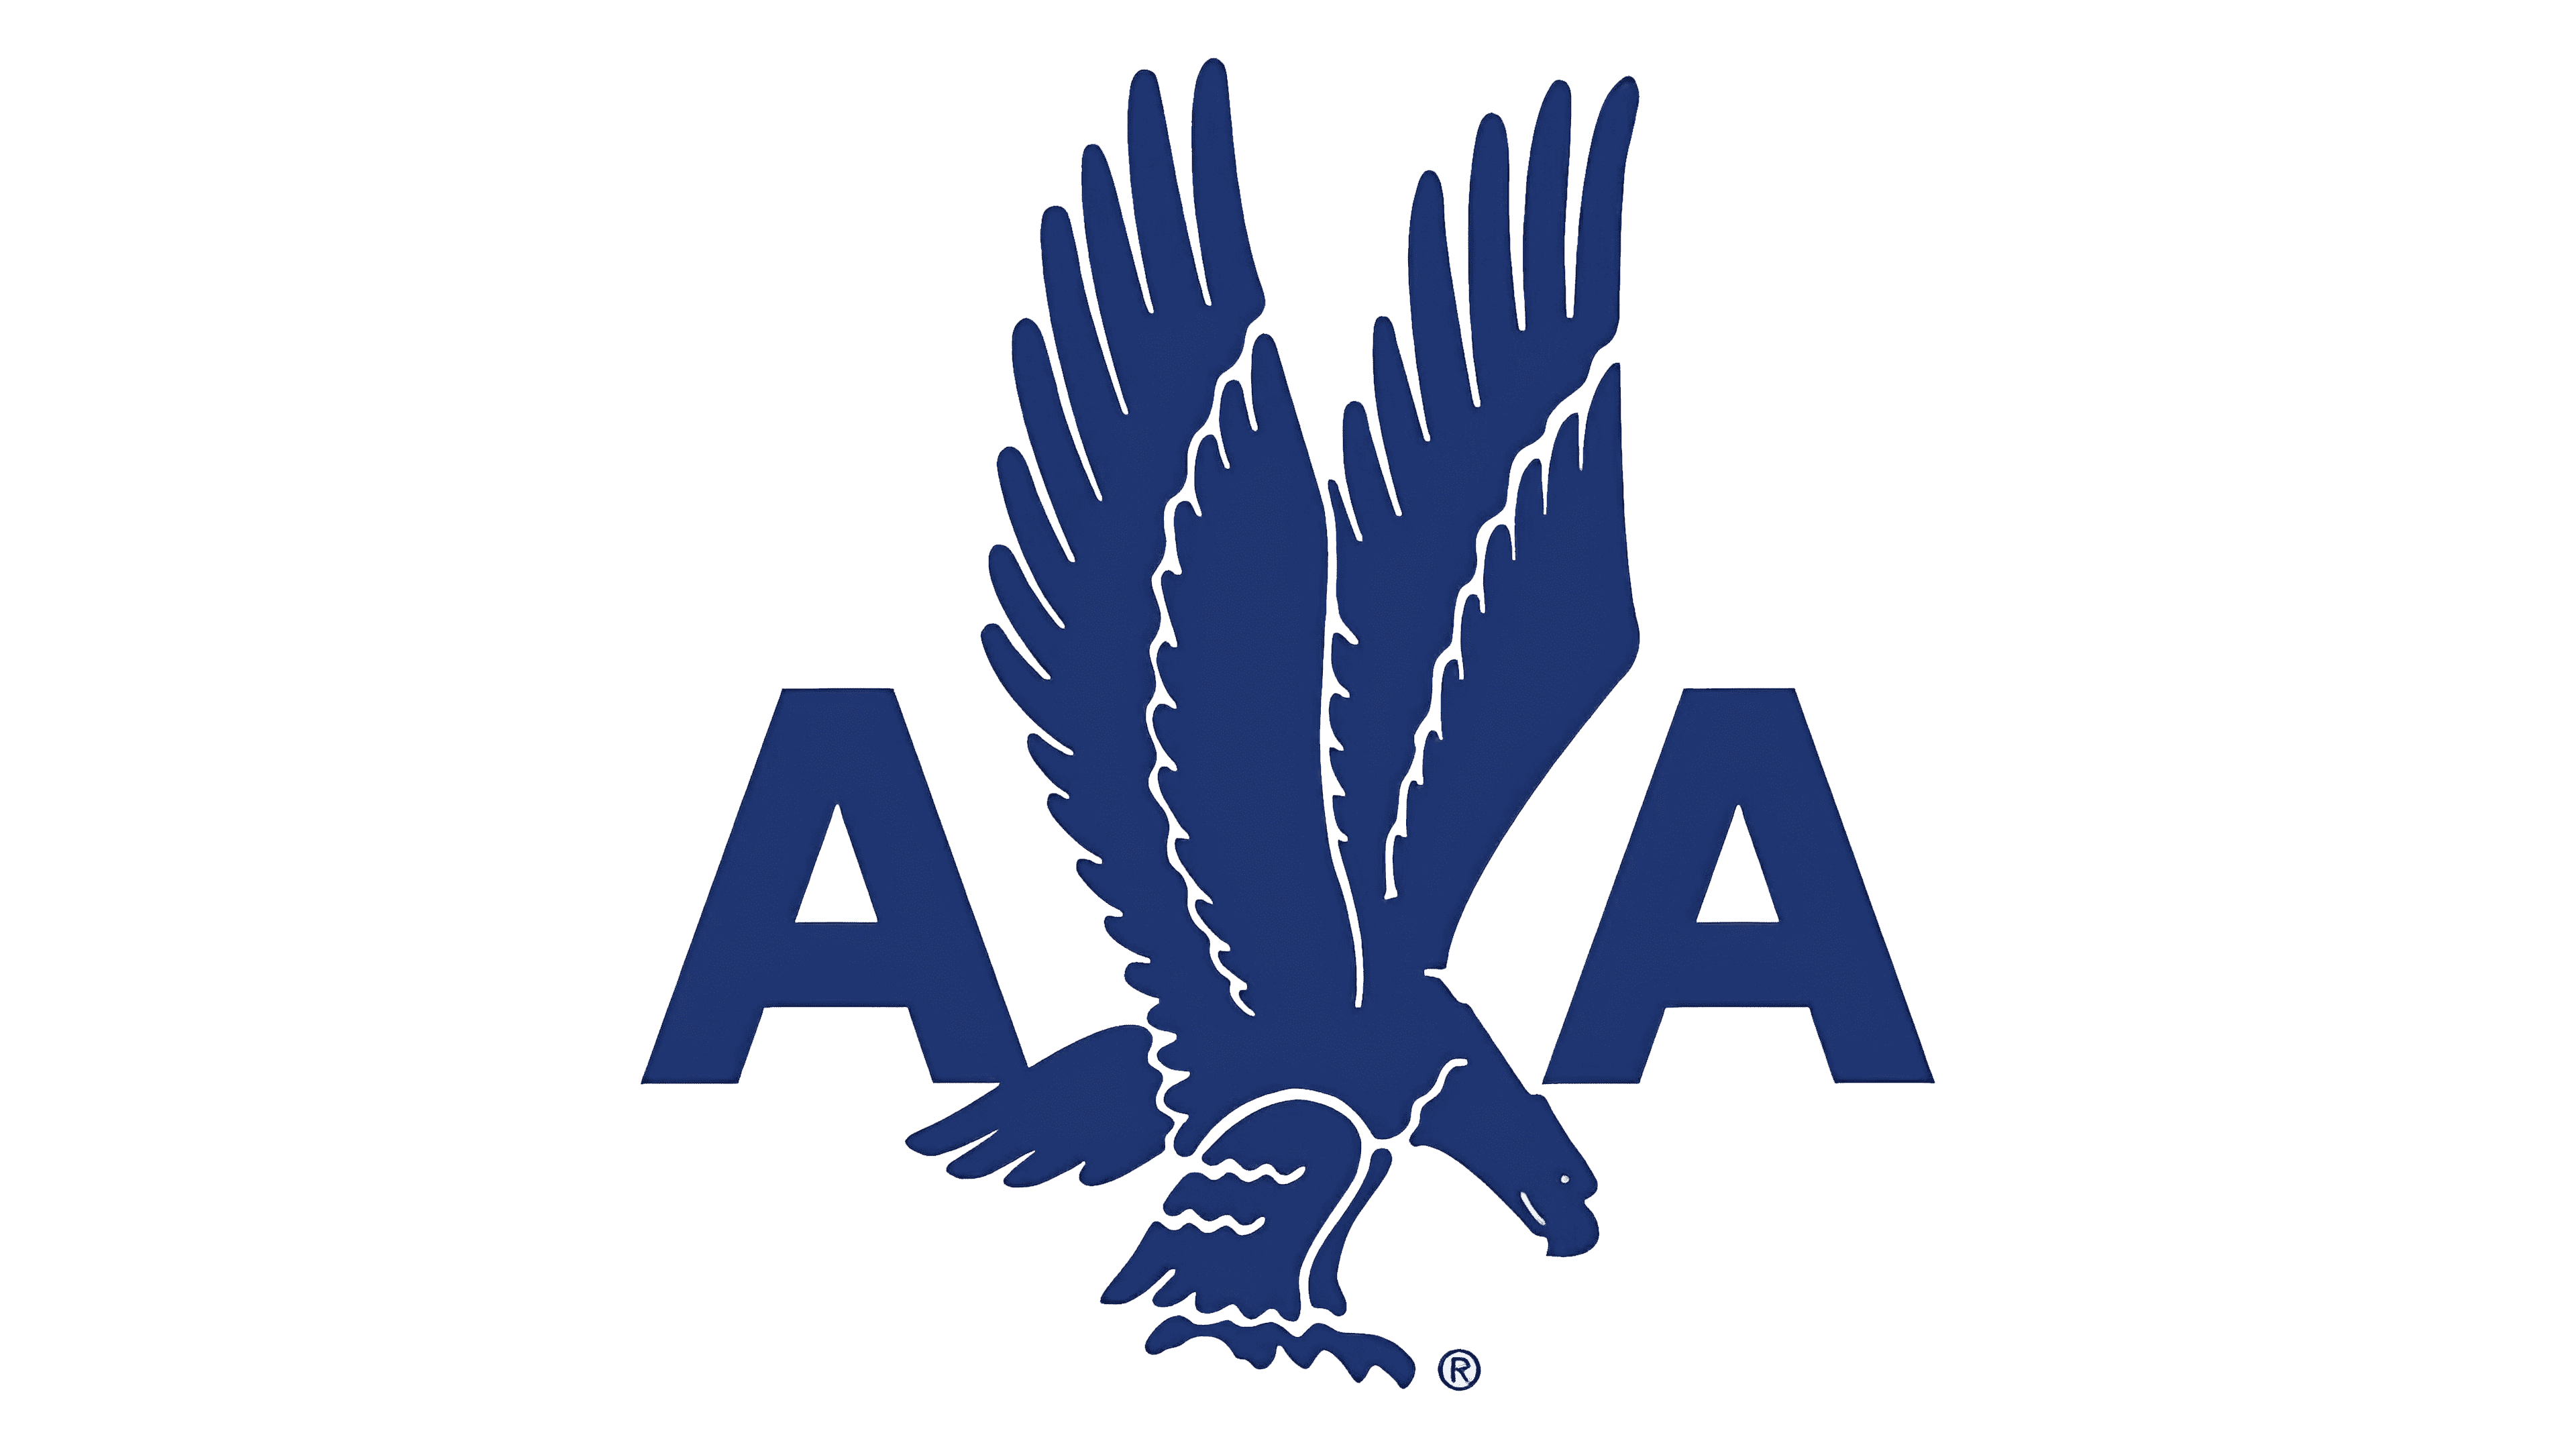 American Airlines Logo, PNG, Symbol, History, Meaning